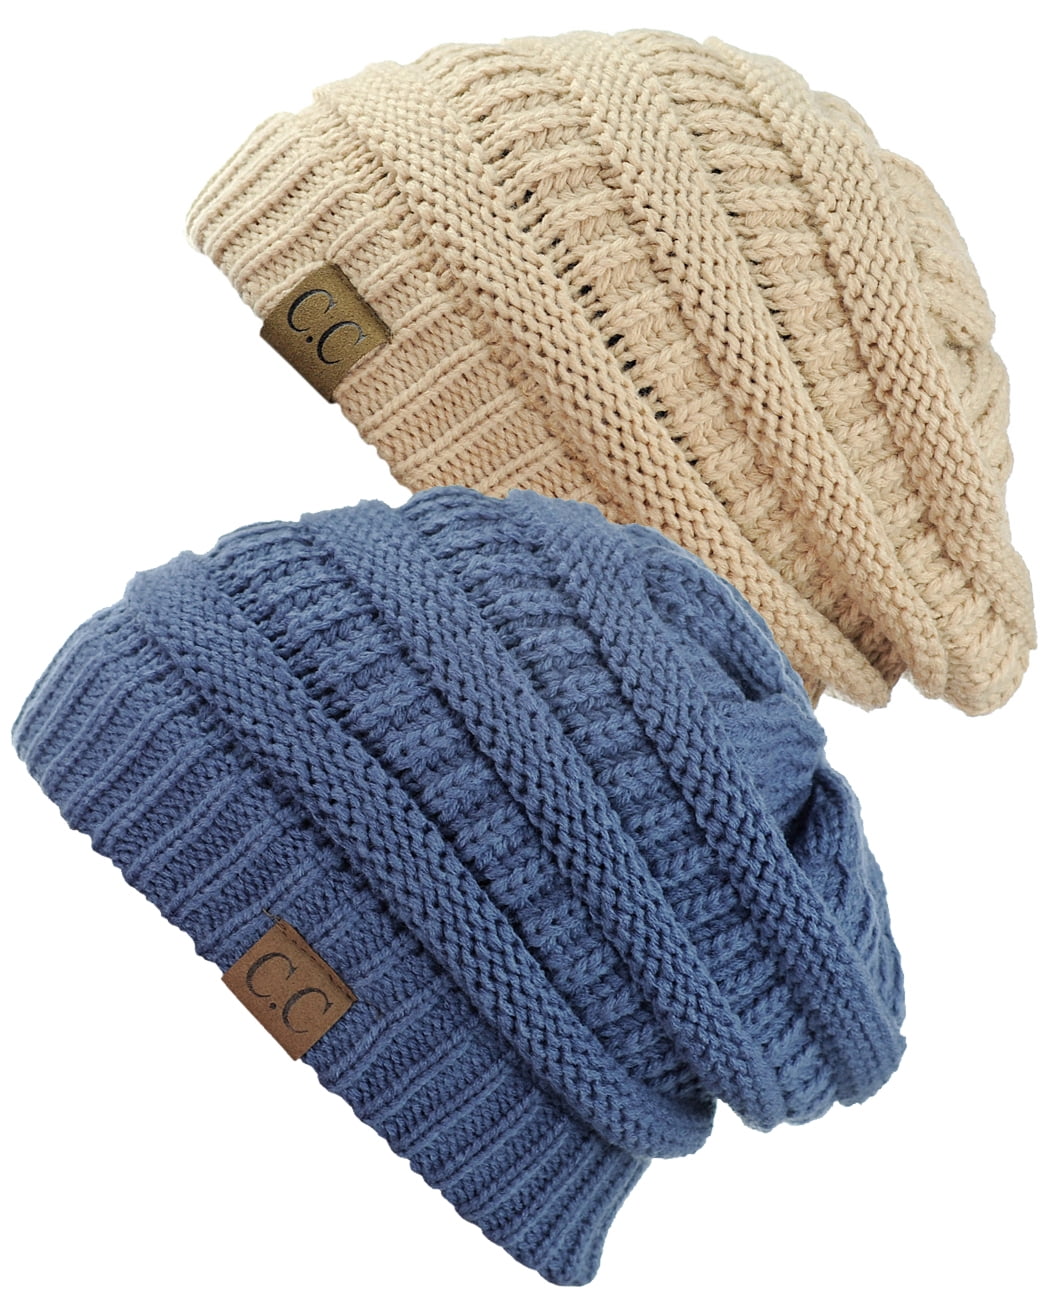 Details about   THICK Ribbed Beanie Knit Hat Ski Cap Skull Warm Winter Cuff AquaBlue /Navy OCEAN 